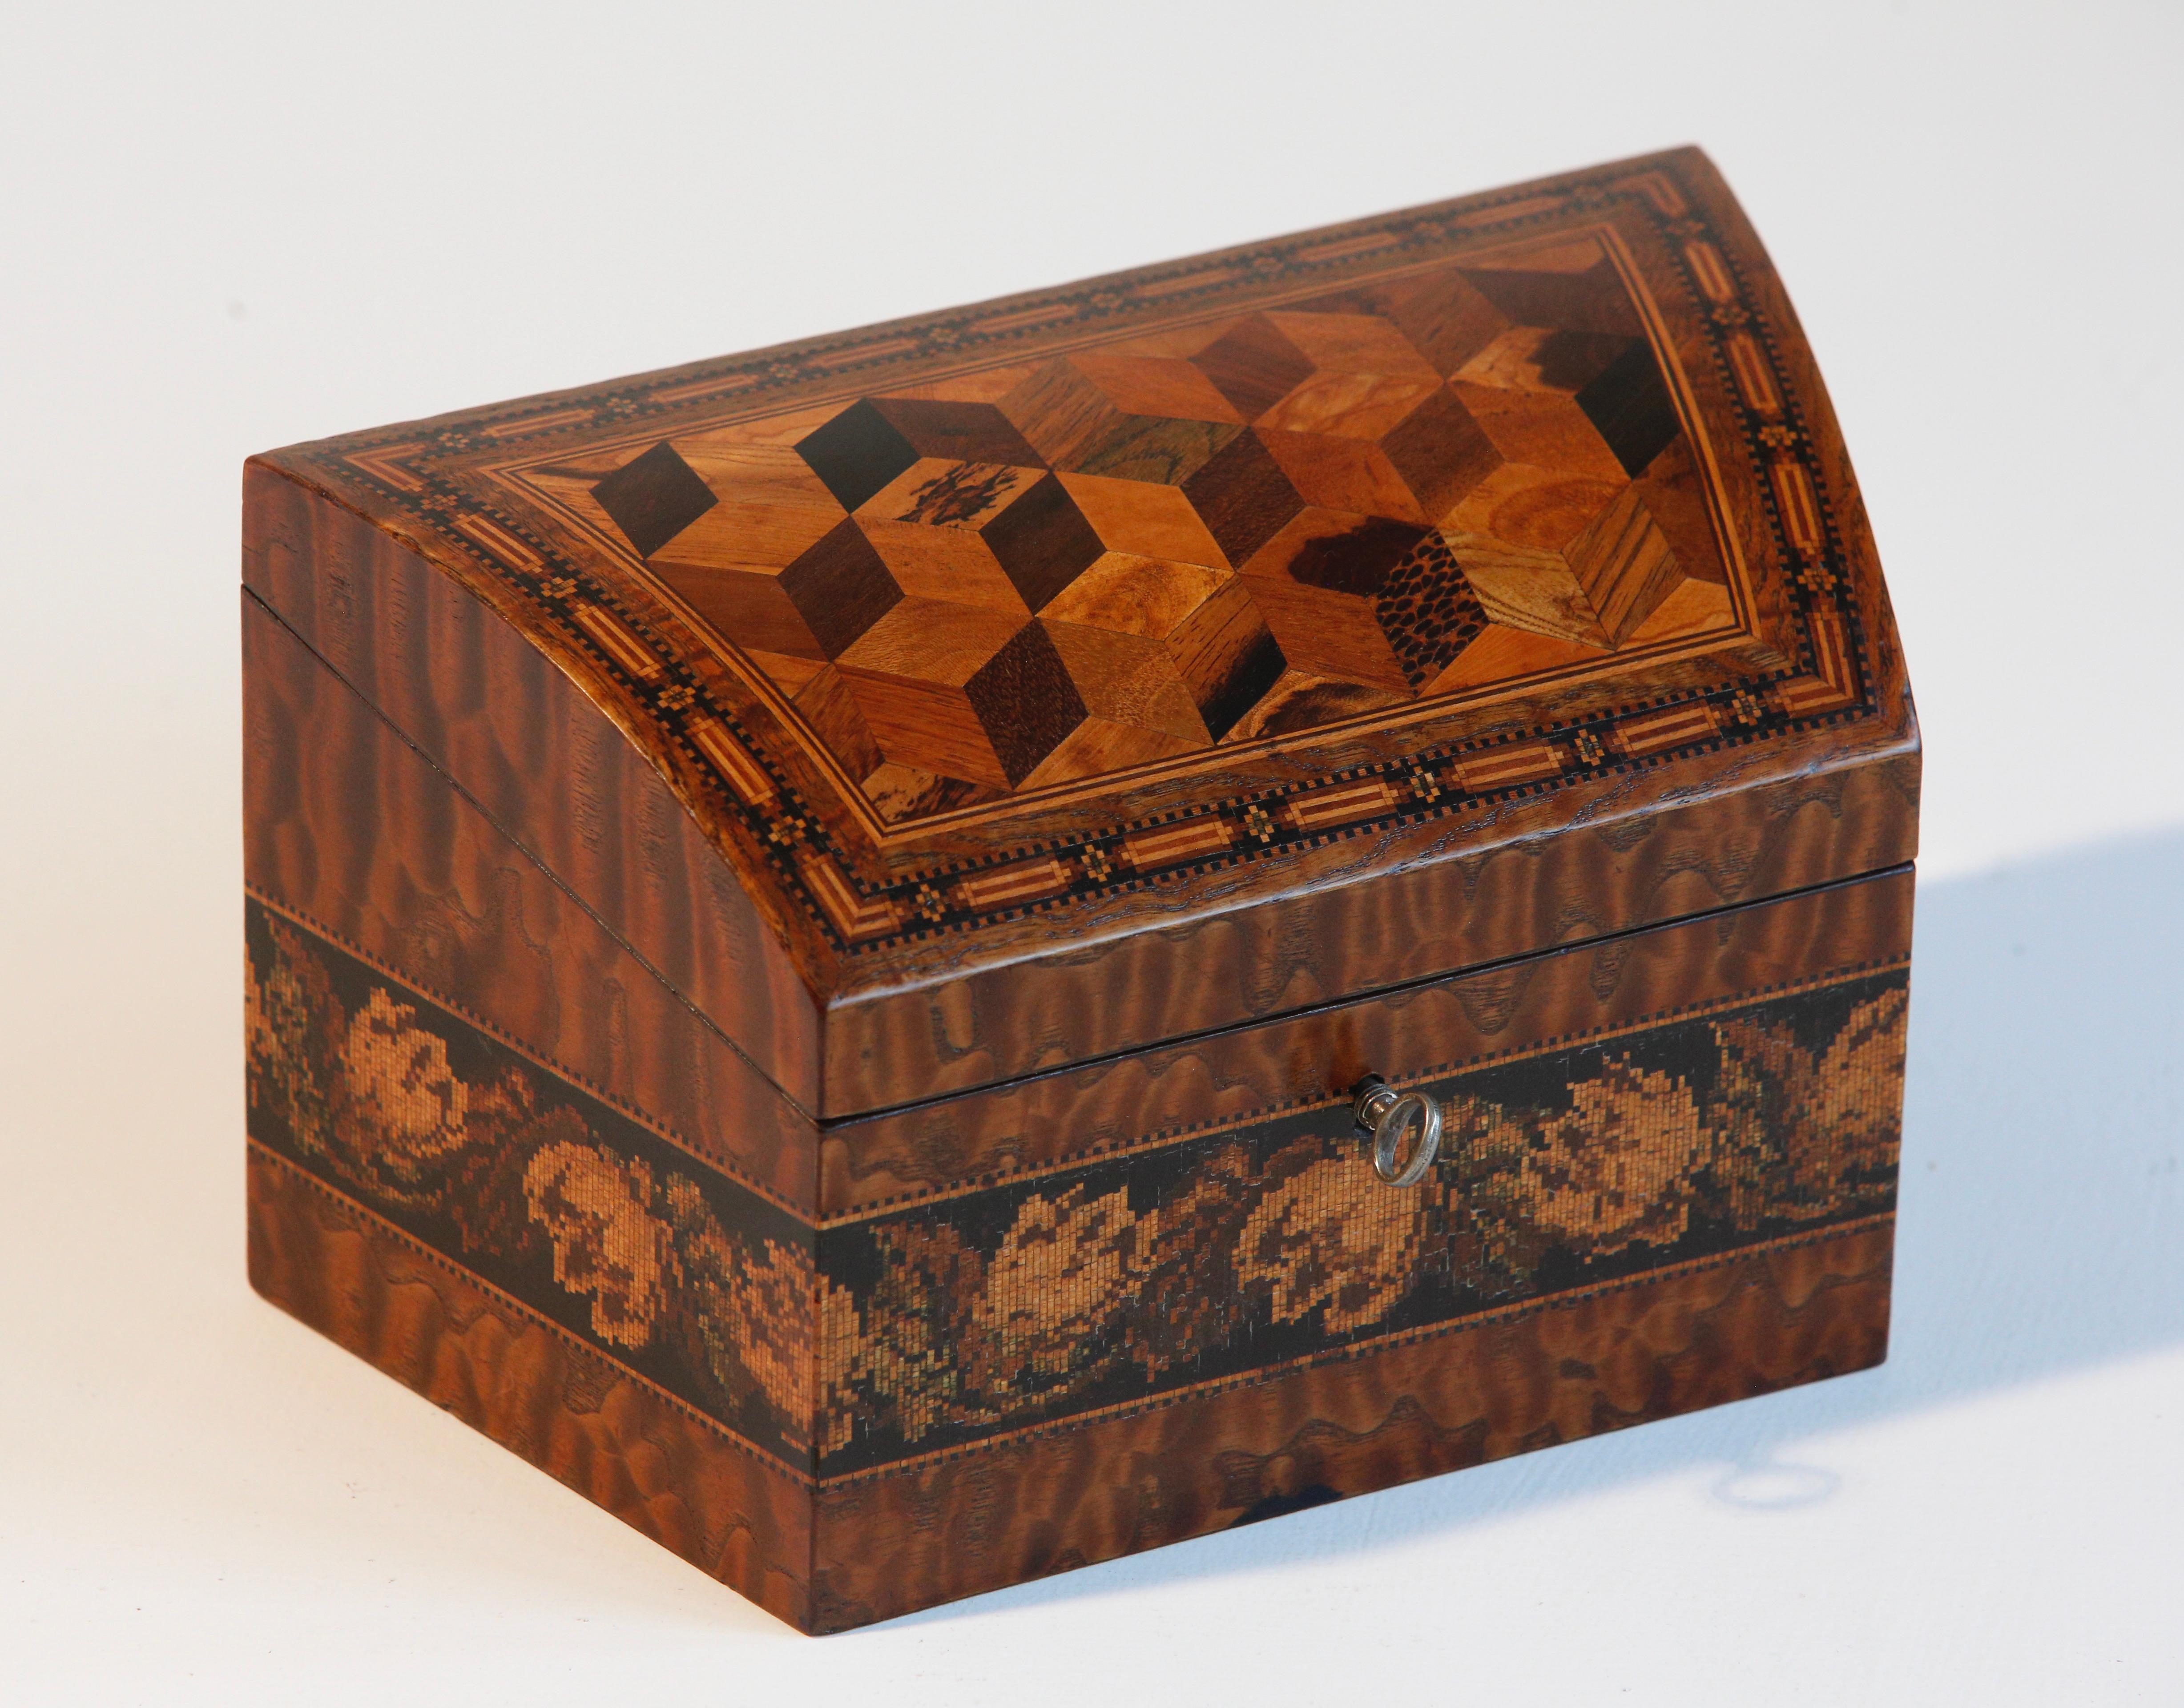 Mid 19th century Tunbridge ware stationery box by Edmund Nye, manufacturer.

The dome-shaped top is inlaid with a specimen parquetry panel, crossbanded with boxwood and stringing and Tunbridge ware borders. The lid is hinged and lifts up to reveal